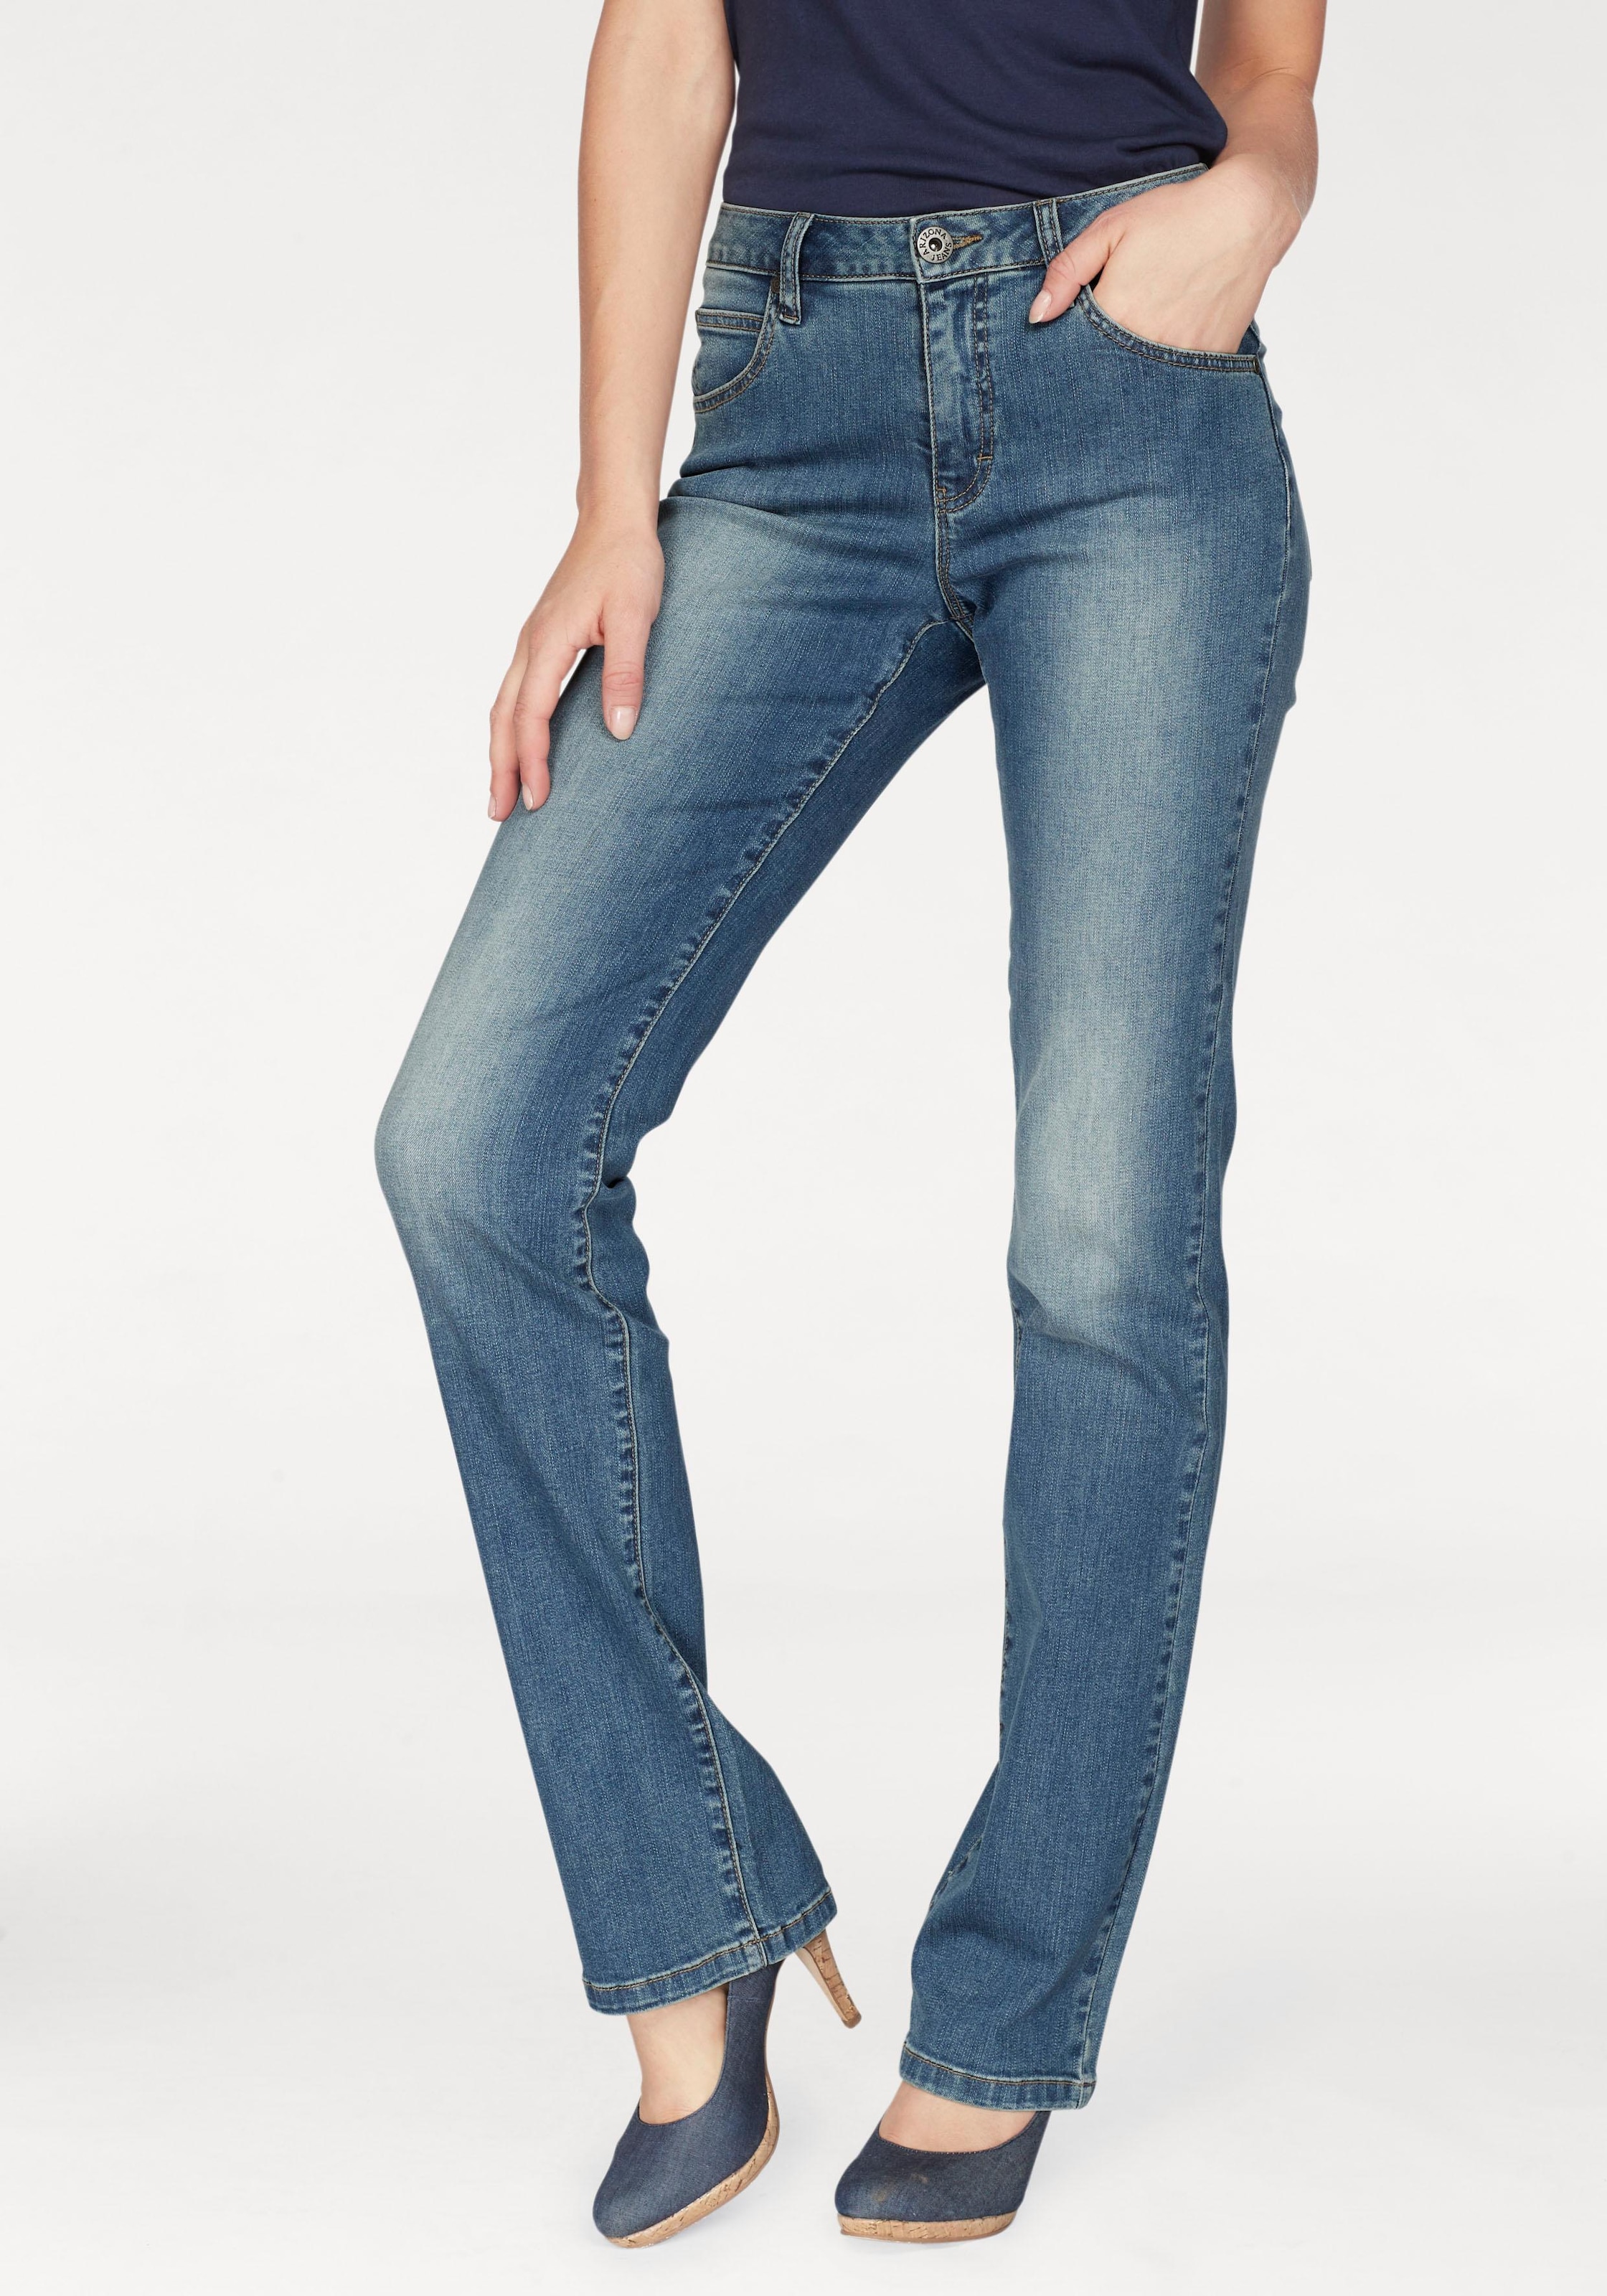 Arizona Gerade Jeans »Curve-Collection«, Shaping bestellen online bei OTTO | Stretchjeans